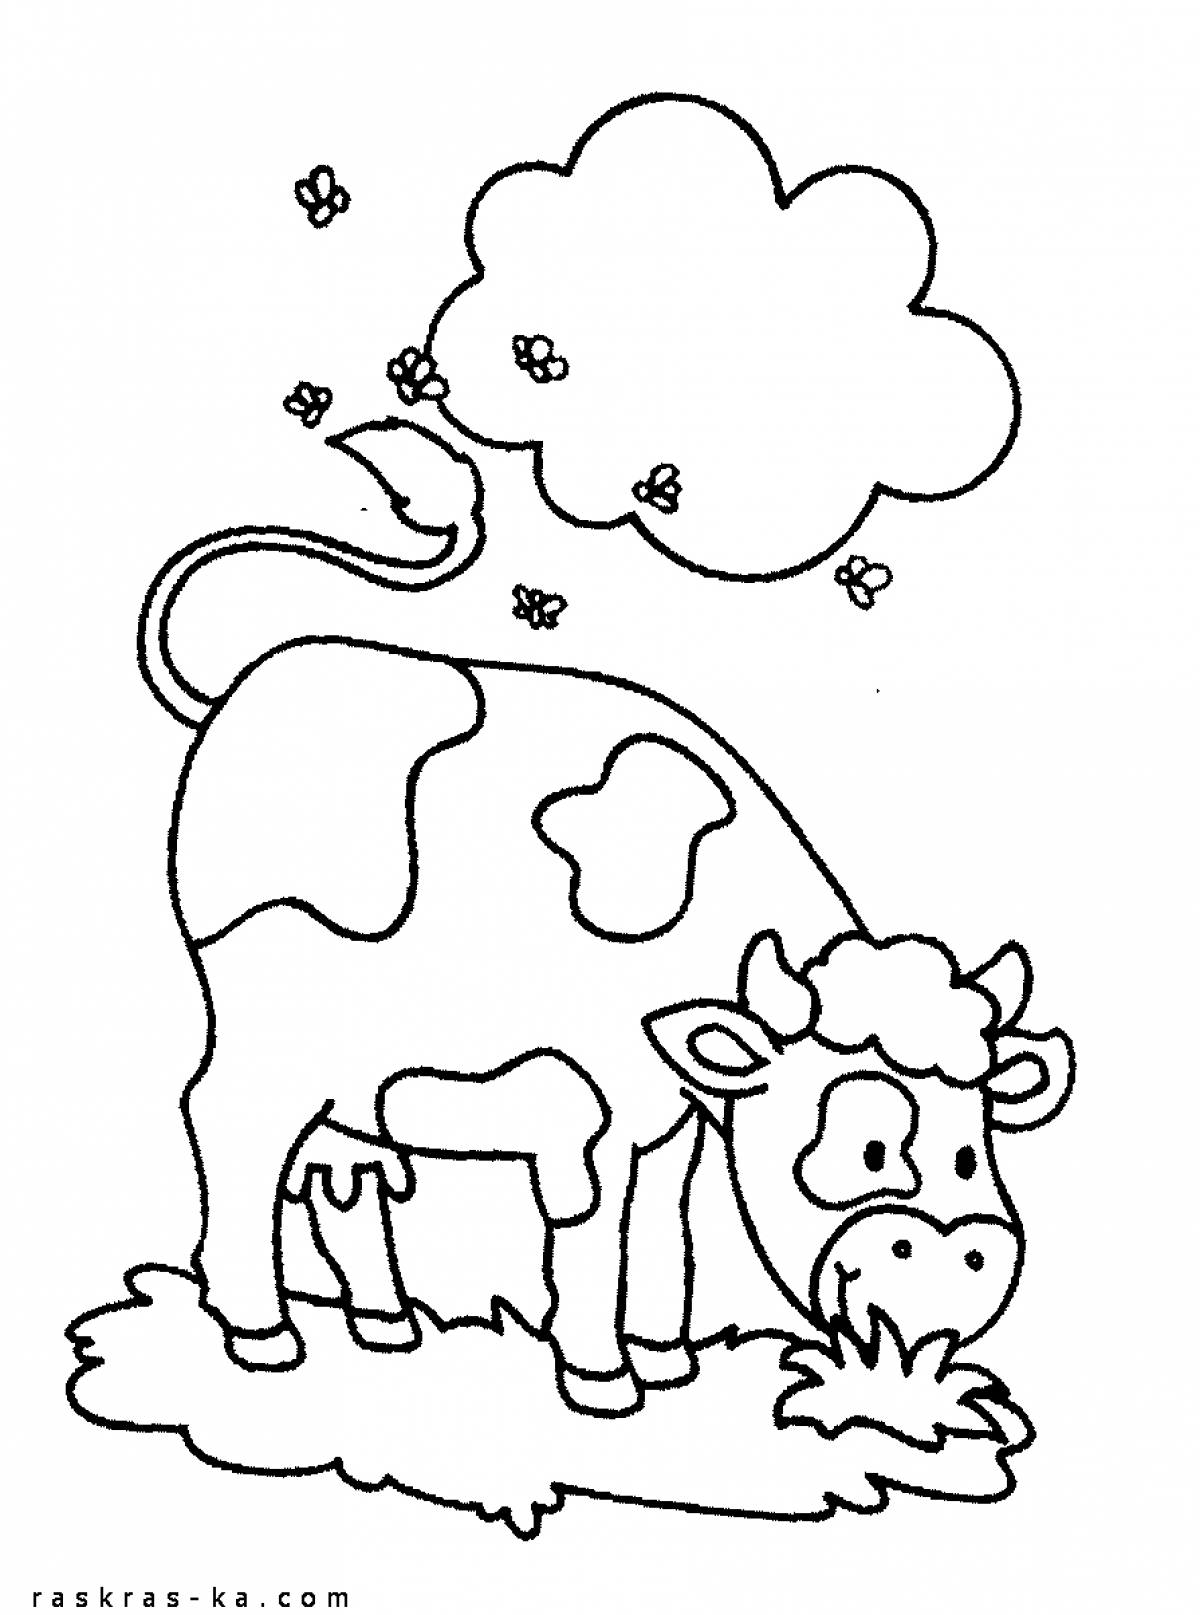 Colouring bright cow for children 4-5 years old